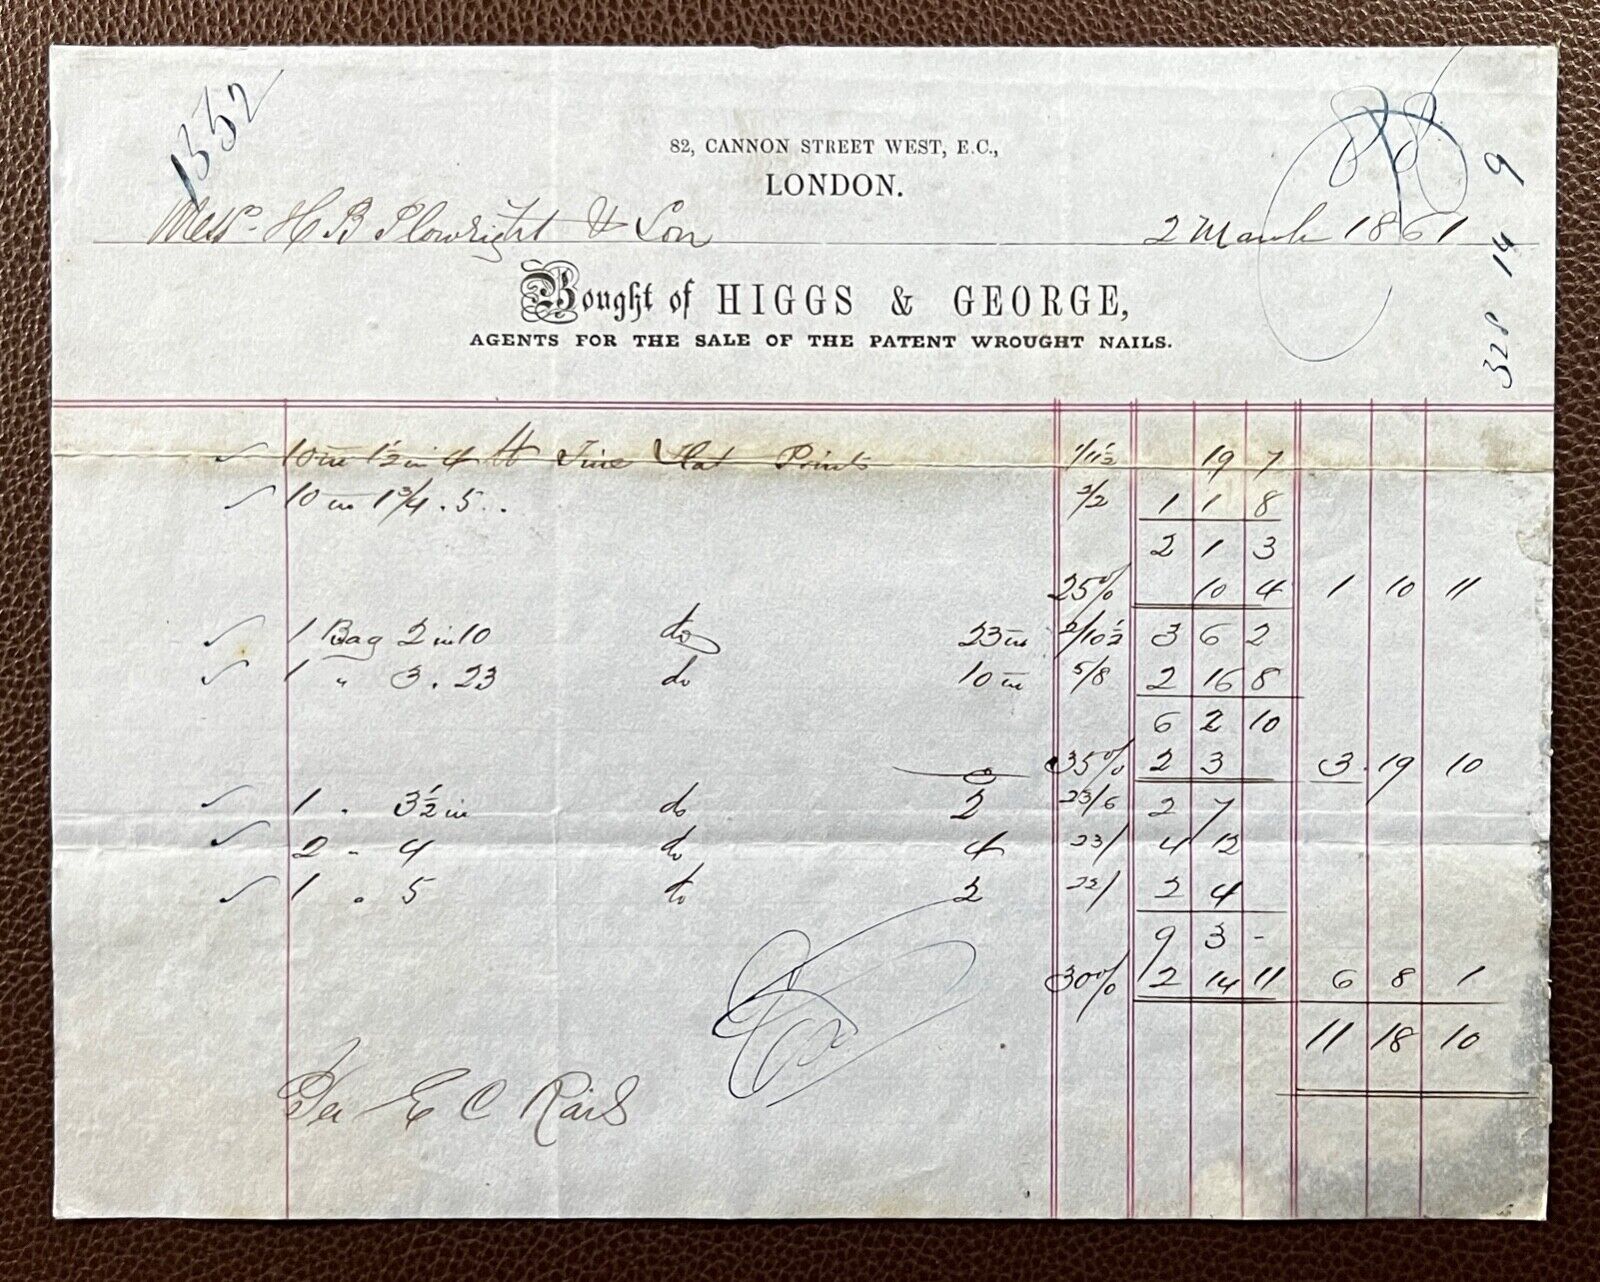 1861 Higgs & George, Wrought Nails Agent, Cannon Street, London Invoice